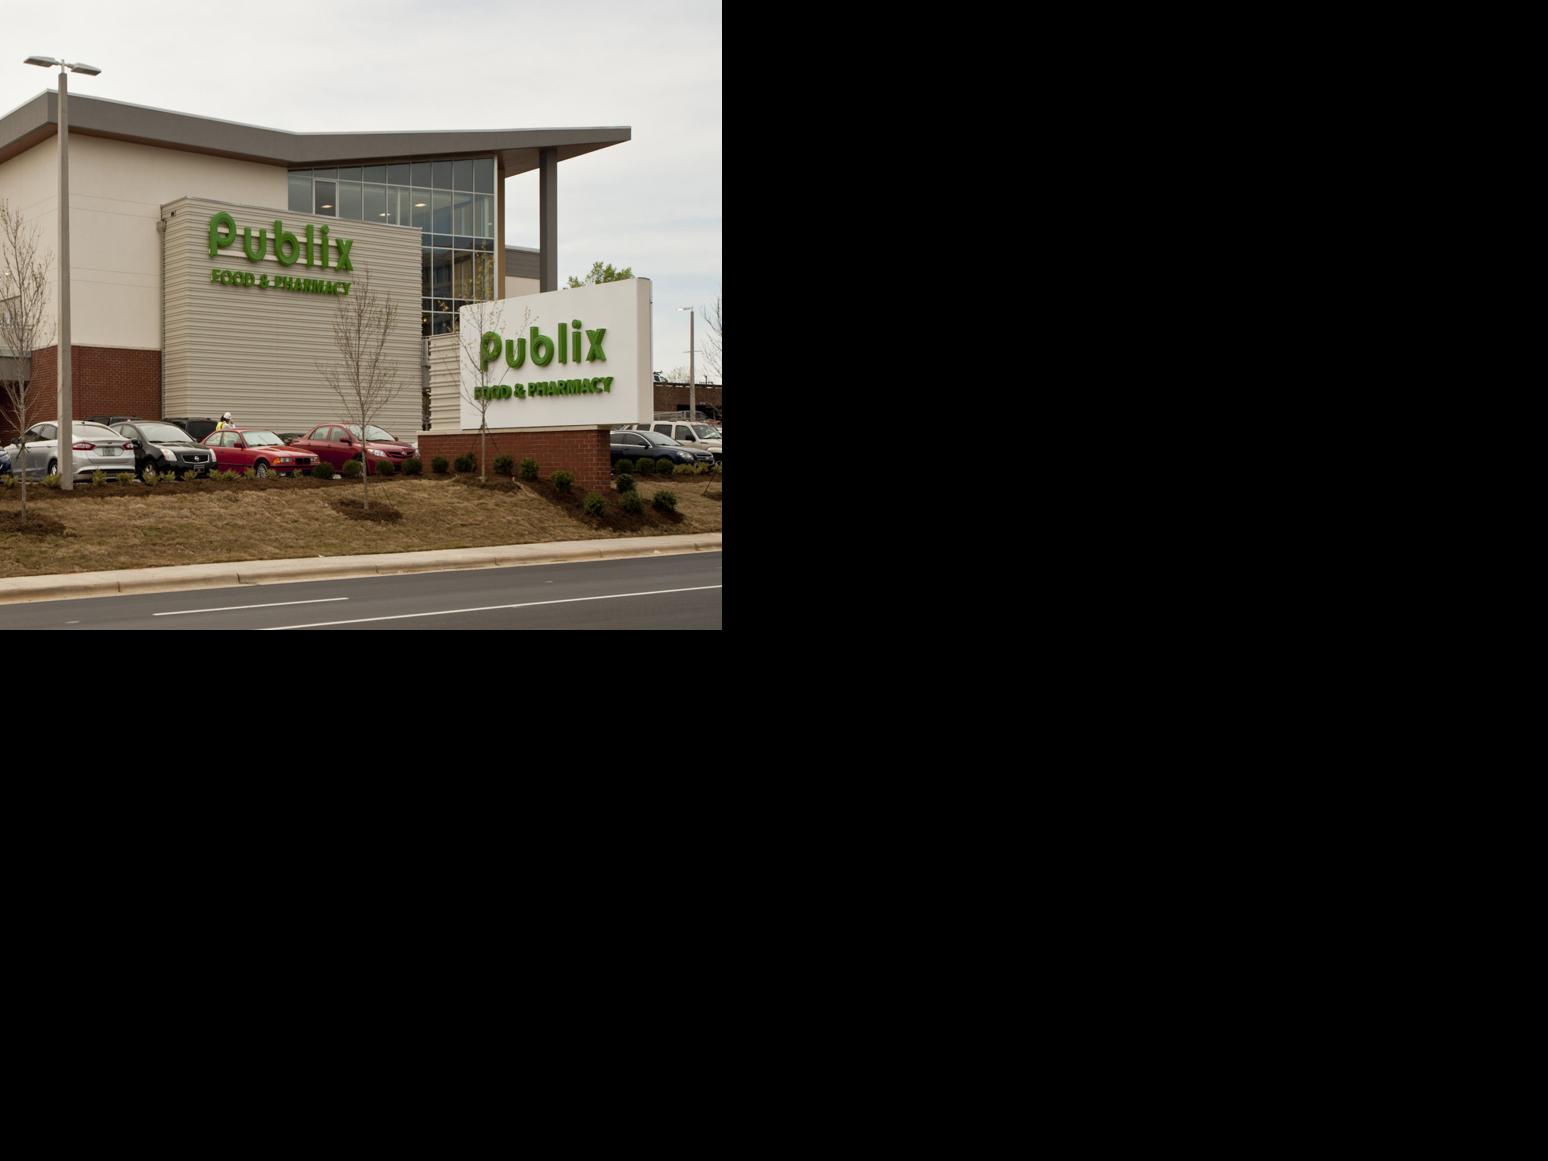 Publix says Winston-Salem store will open May 11 | Local News | www.lvbagssale.com